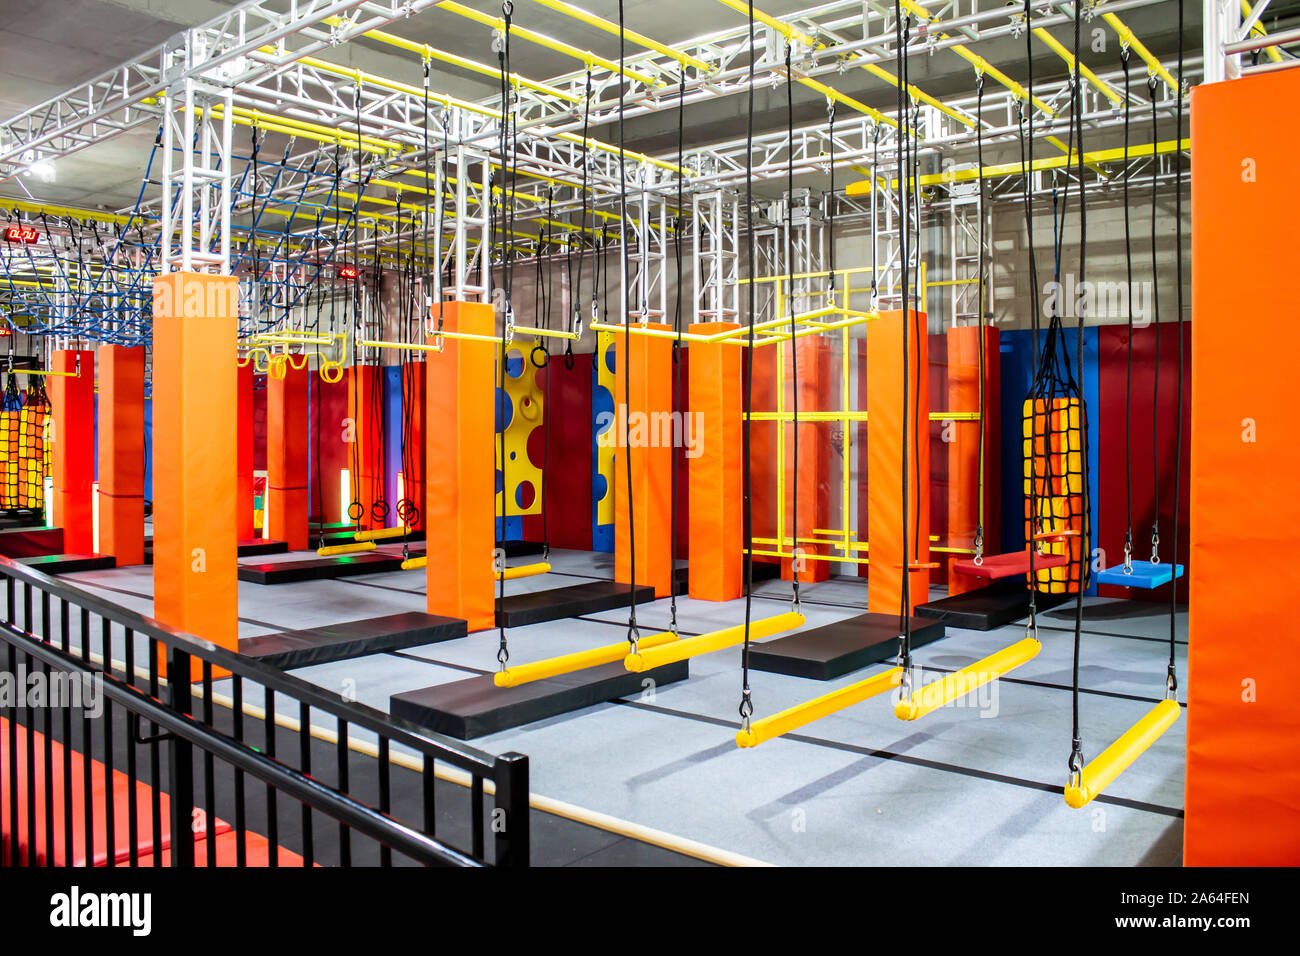 Brightly coloured interior ninja warrior parkour gym obstacle course with aerial netting Stock Photo